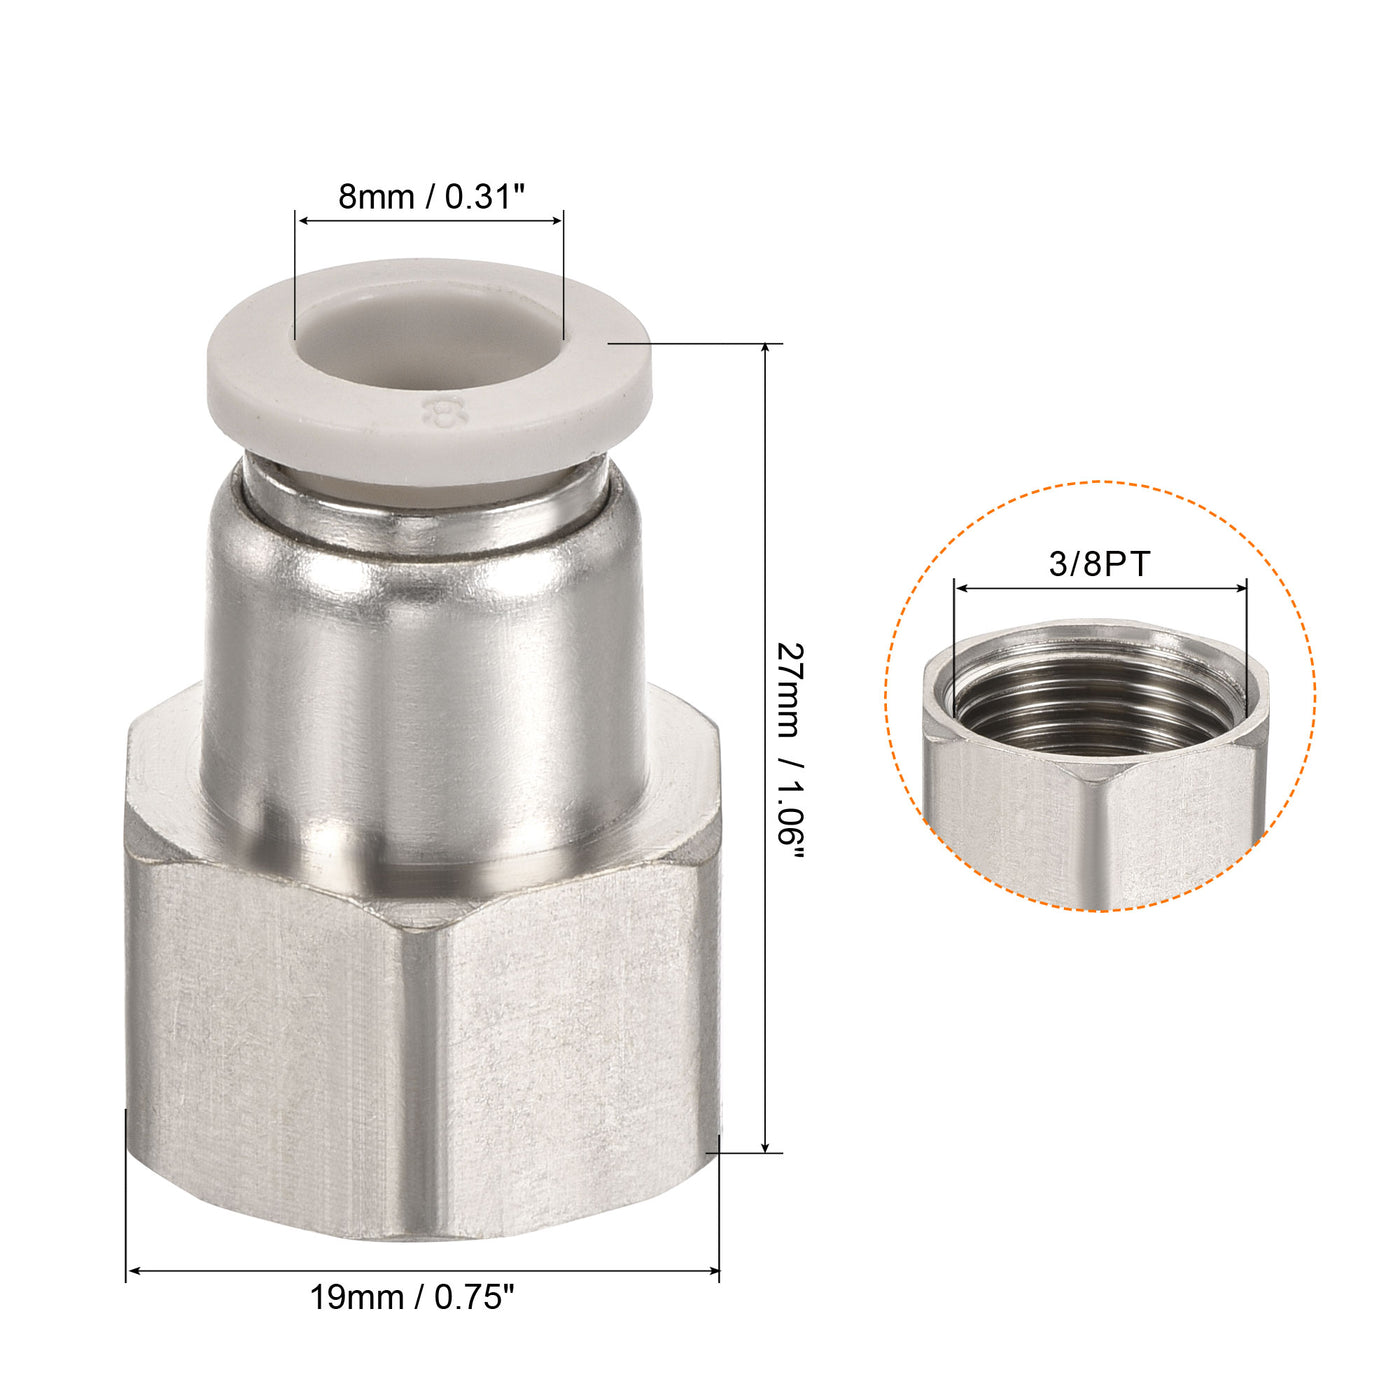 Harfington Push to Connect Fittings 3/8PT Female Thread Fit 8mm Tube OD Nickel-plated Copper Straight Union Fitting, Pack of 4